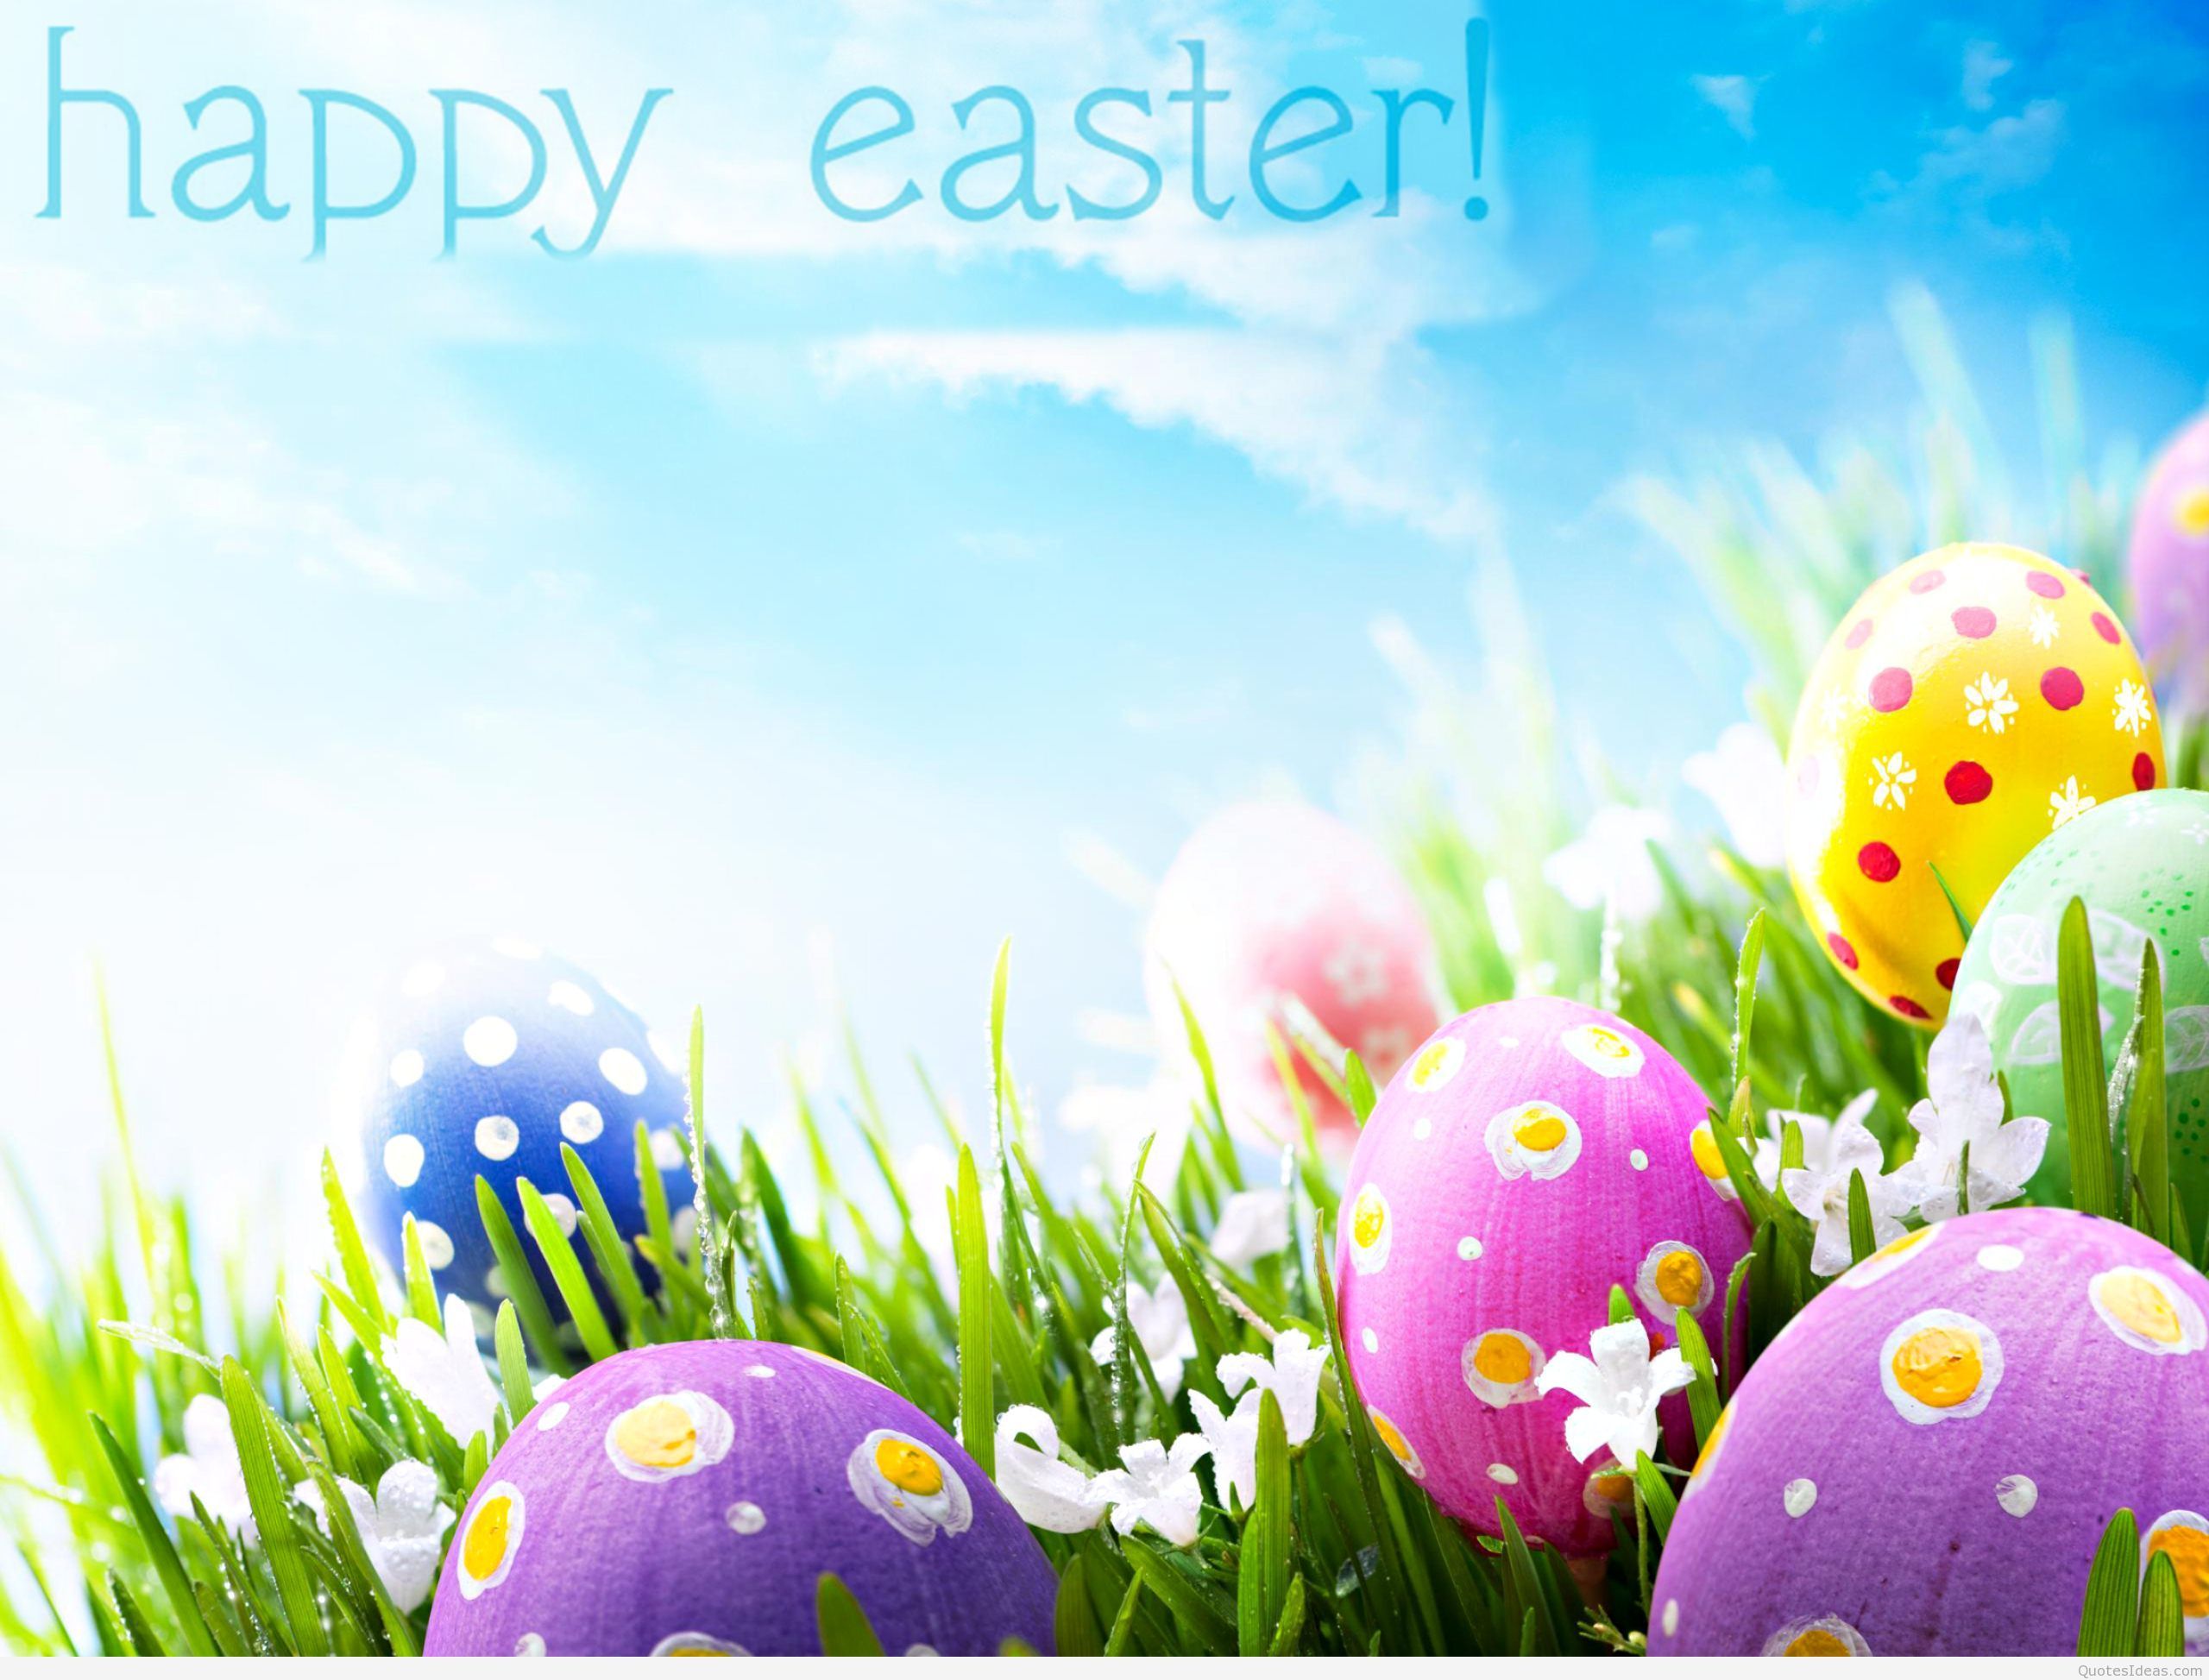 Happy easter wallpaper with eggs